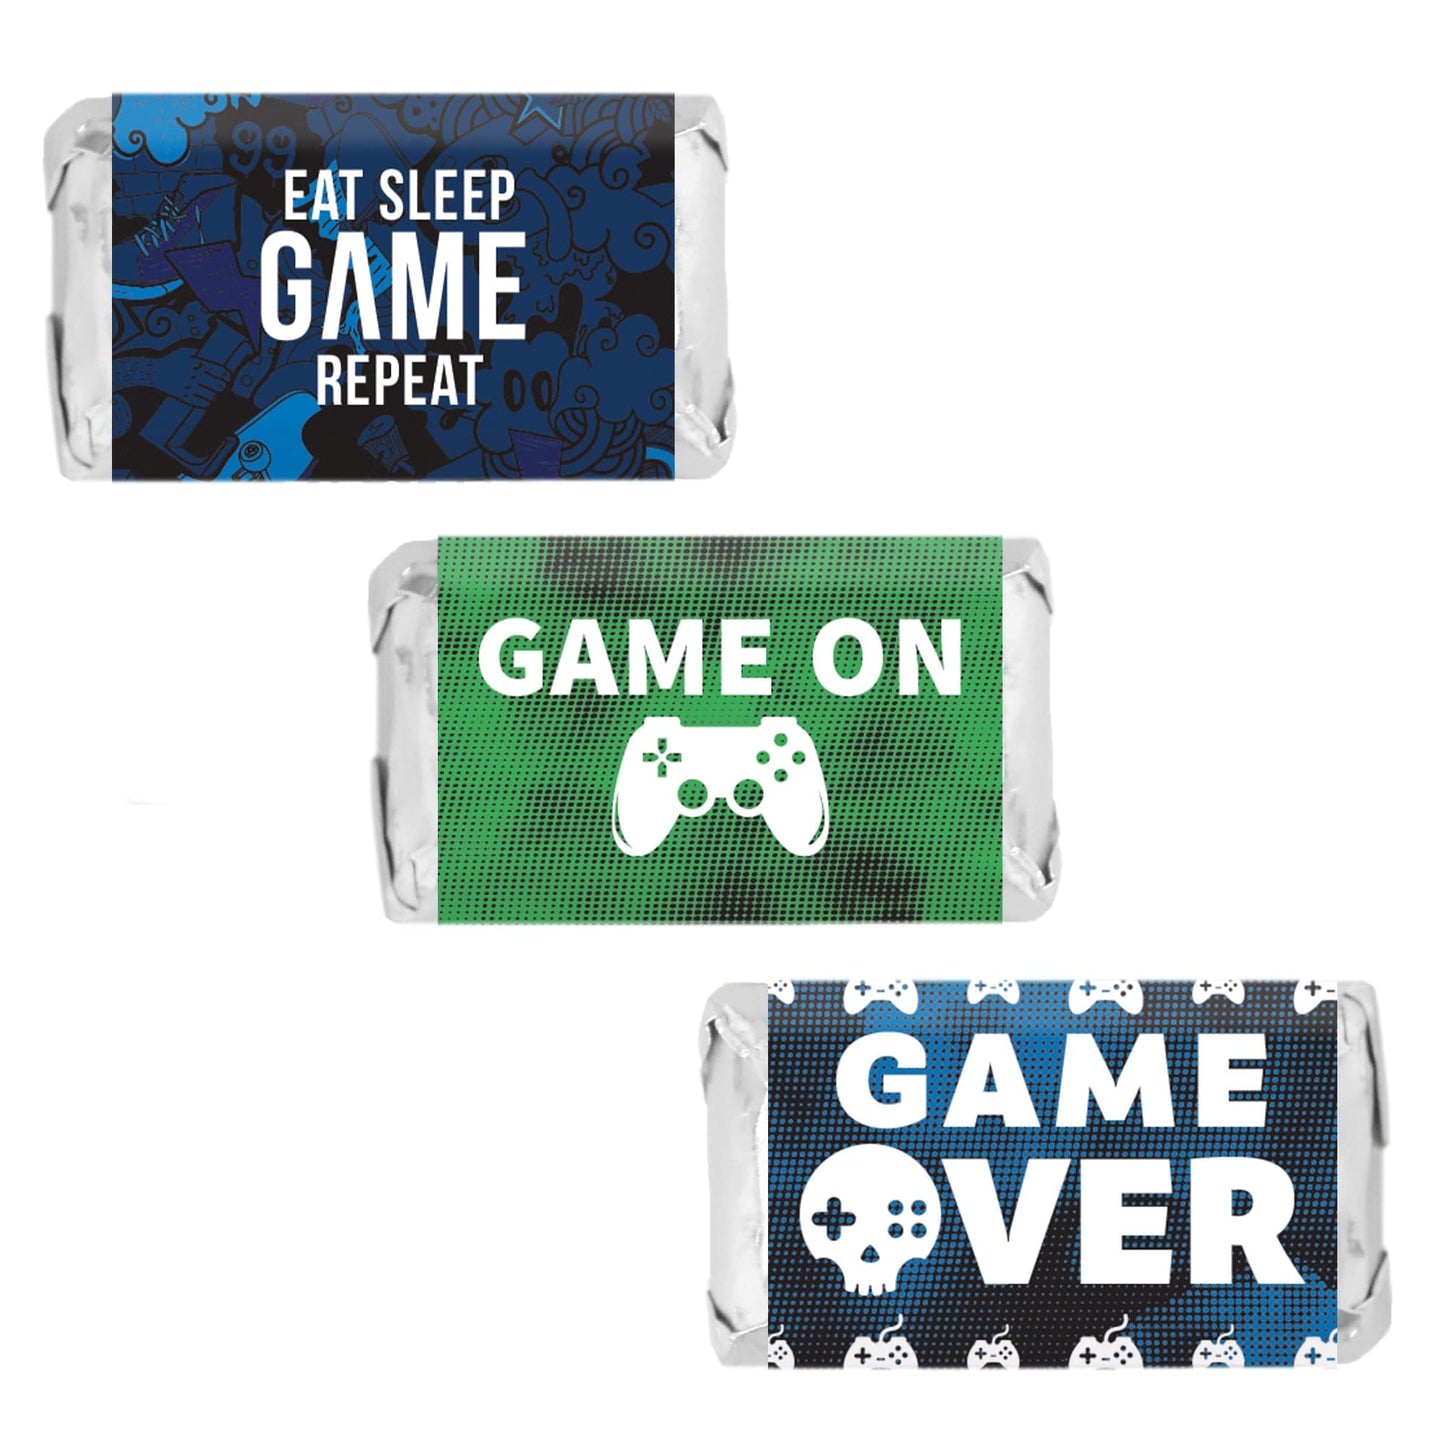 Video Gamer Birthday Party Mini Candy Bar Labels - 45 Stickers